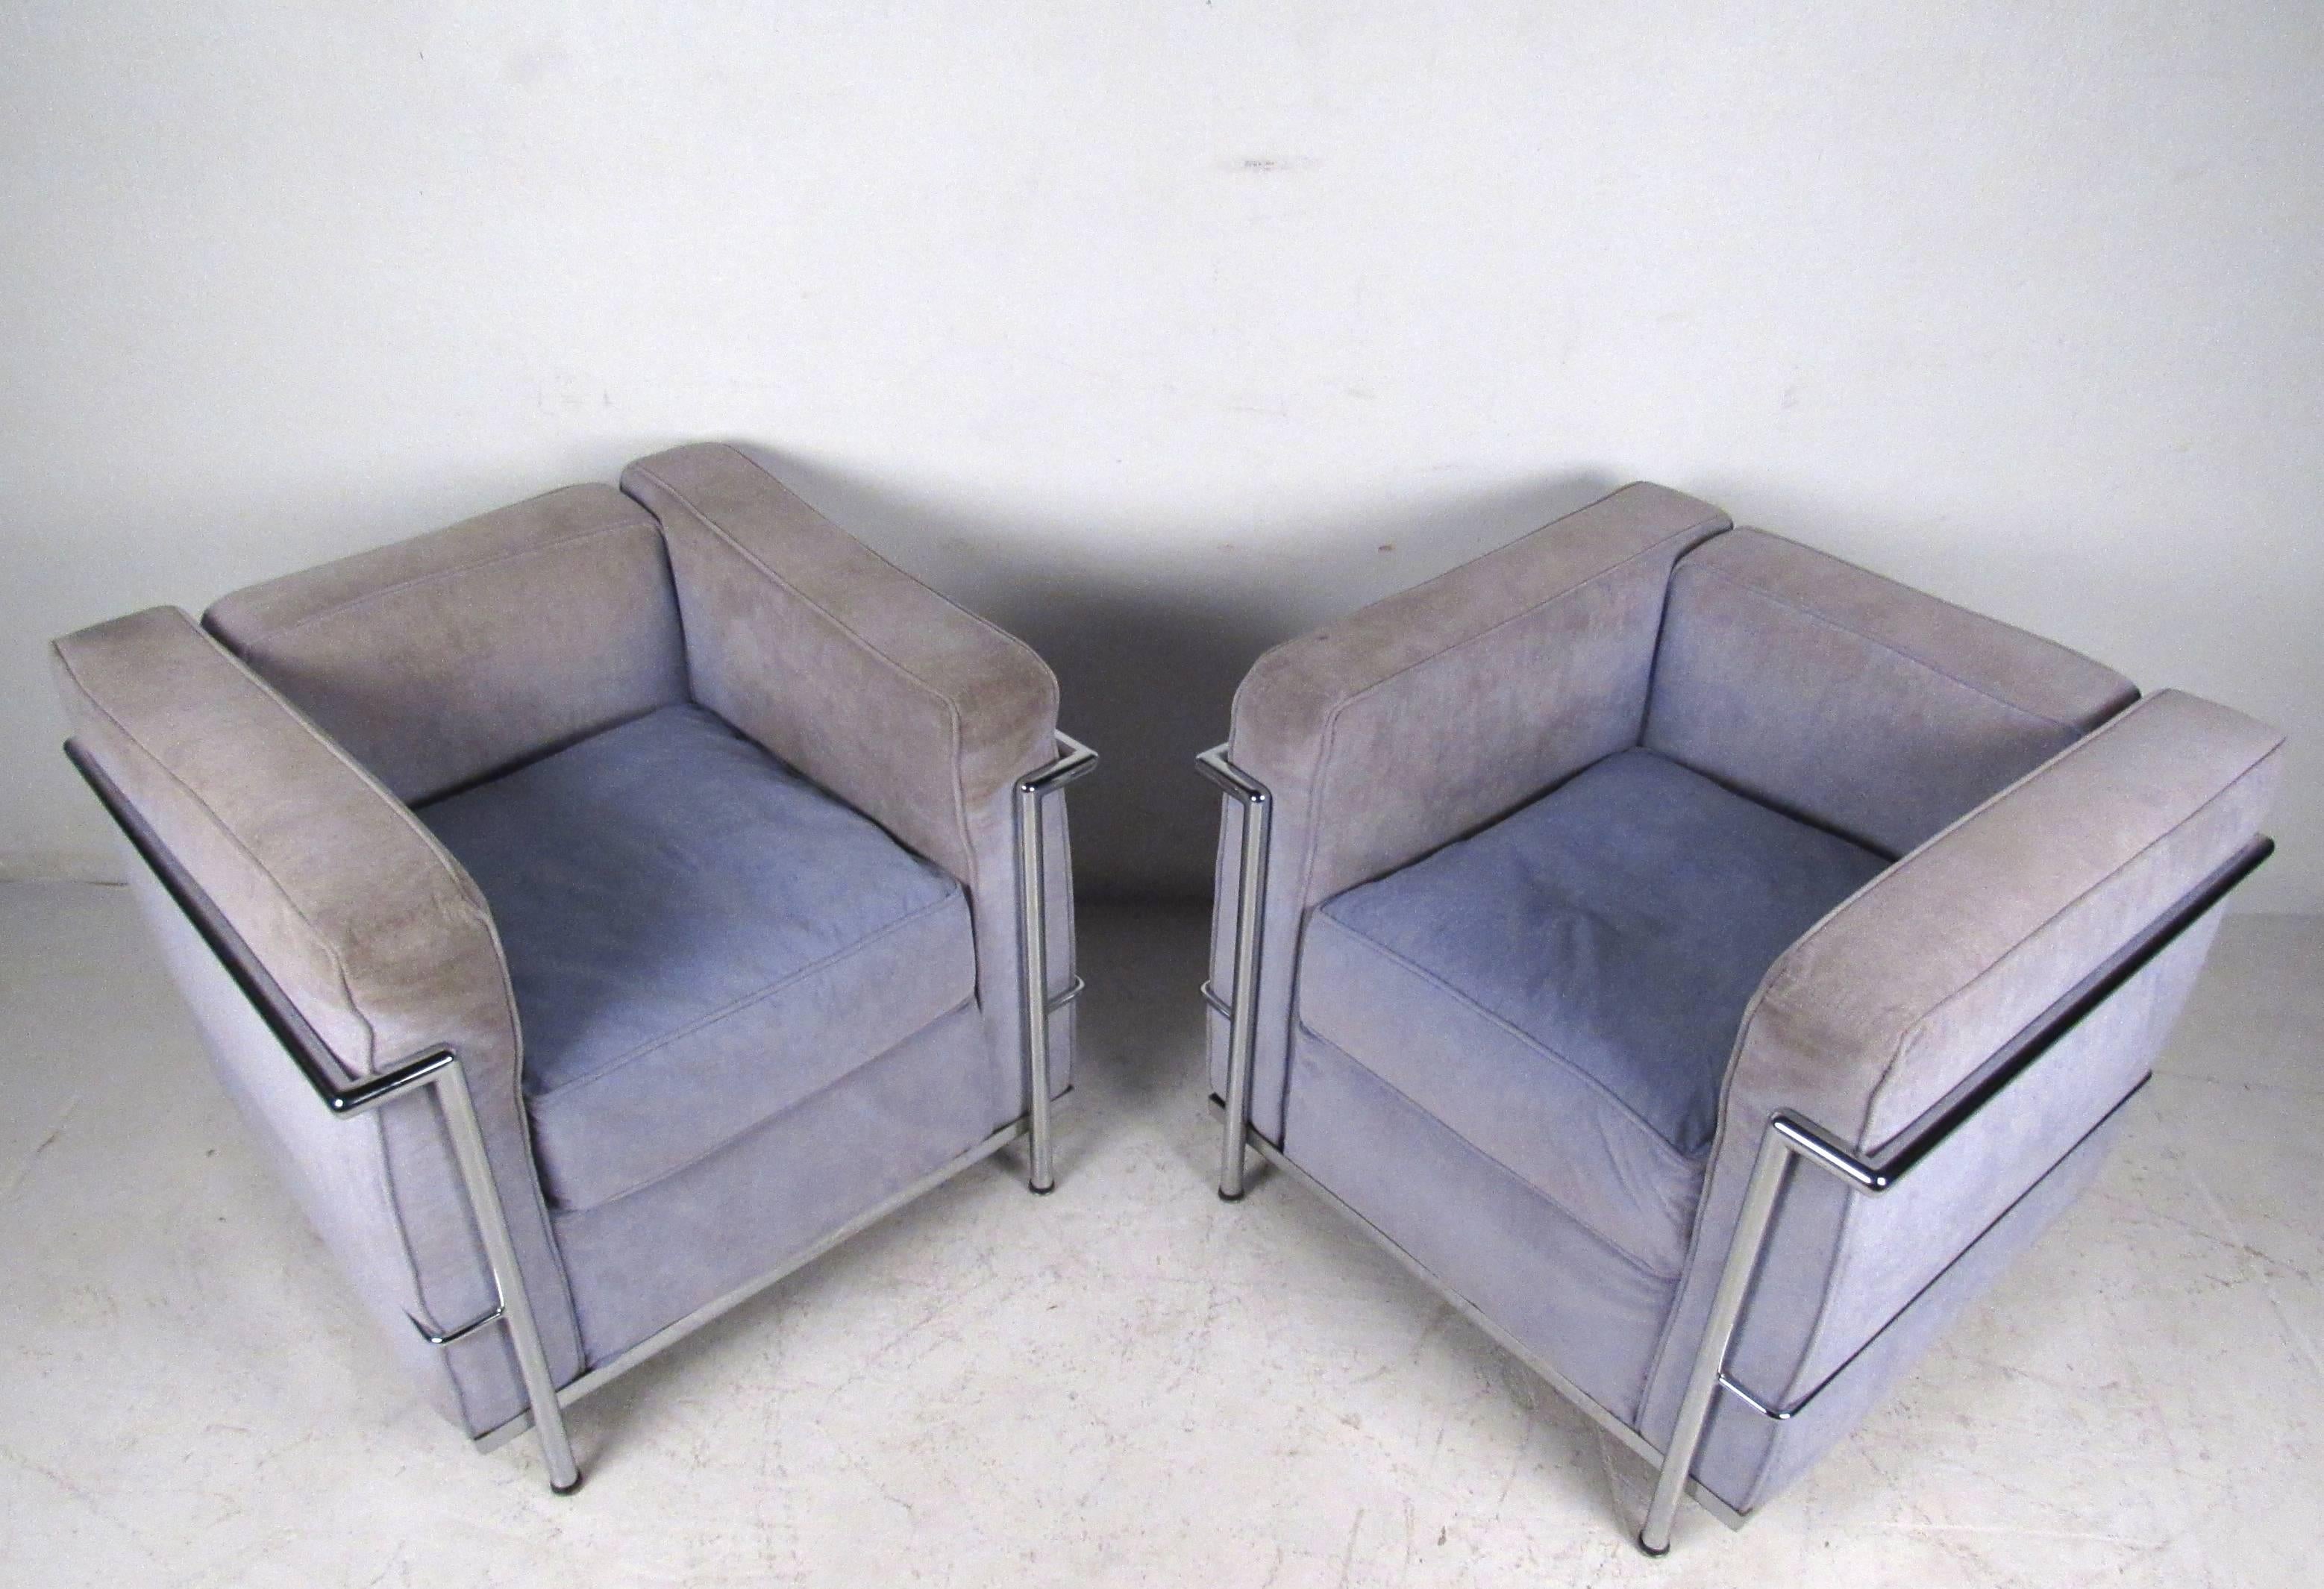 Pair of Vintage Modern Le Corbusier Style Lounge Chairs In Good Condition For Sale In Brooklyn, NY